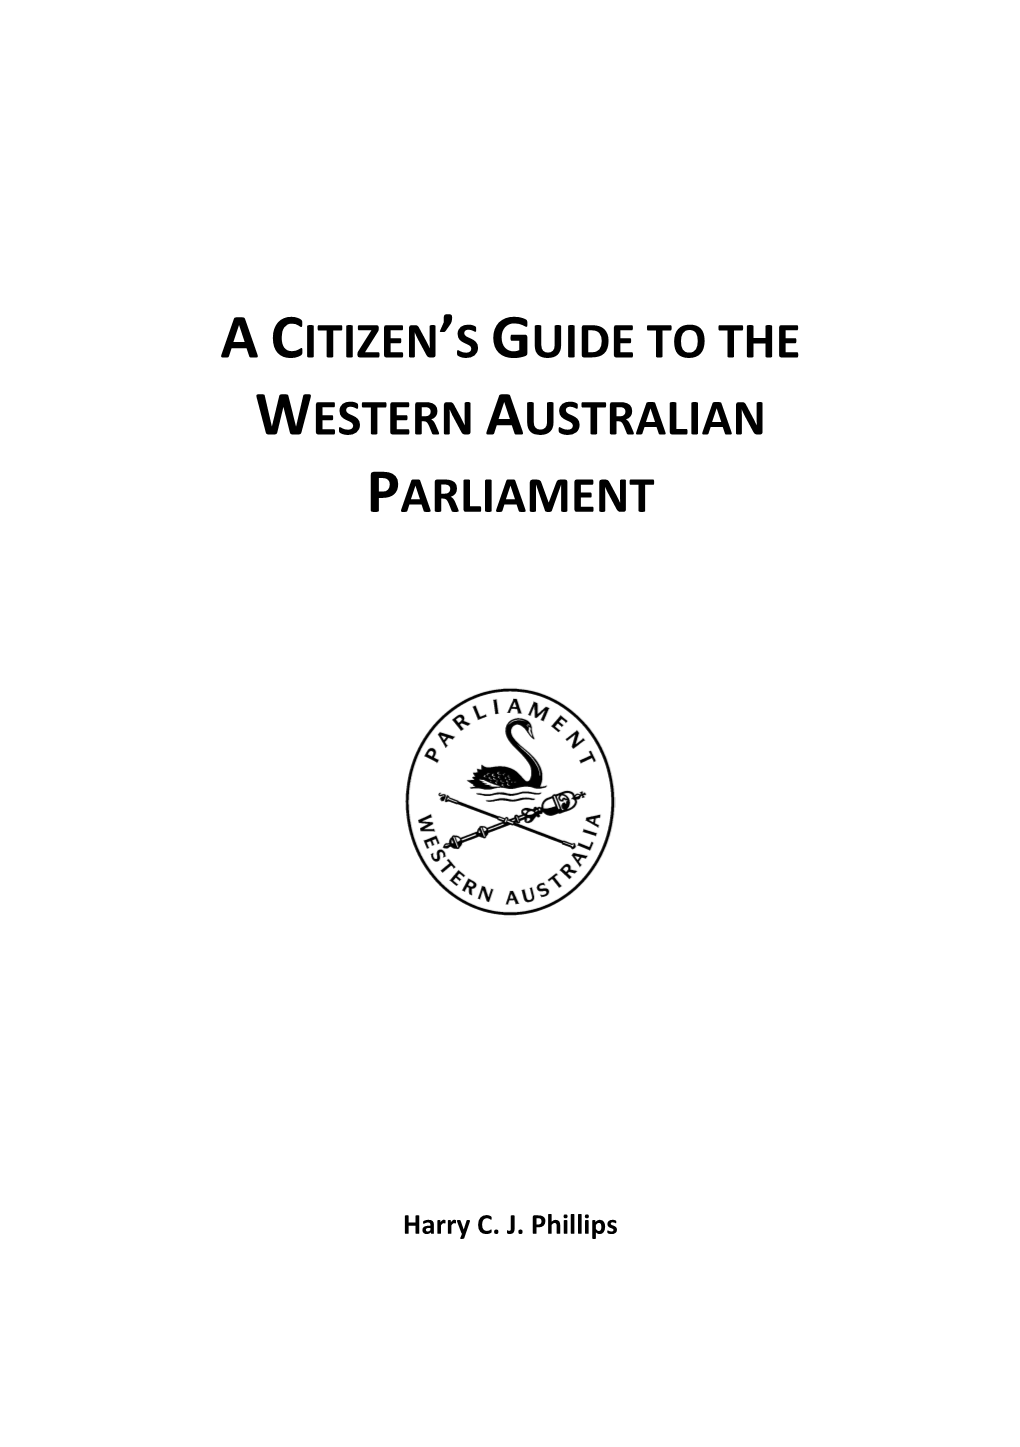 A Citizen's Guide to the Western Australian Parliament